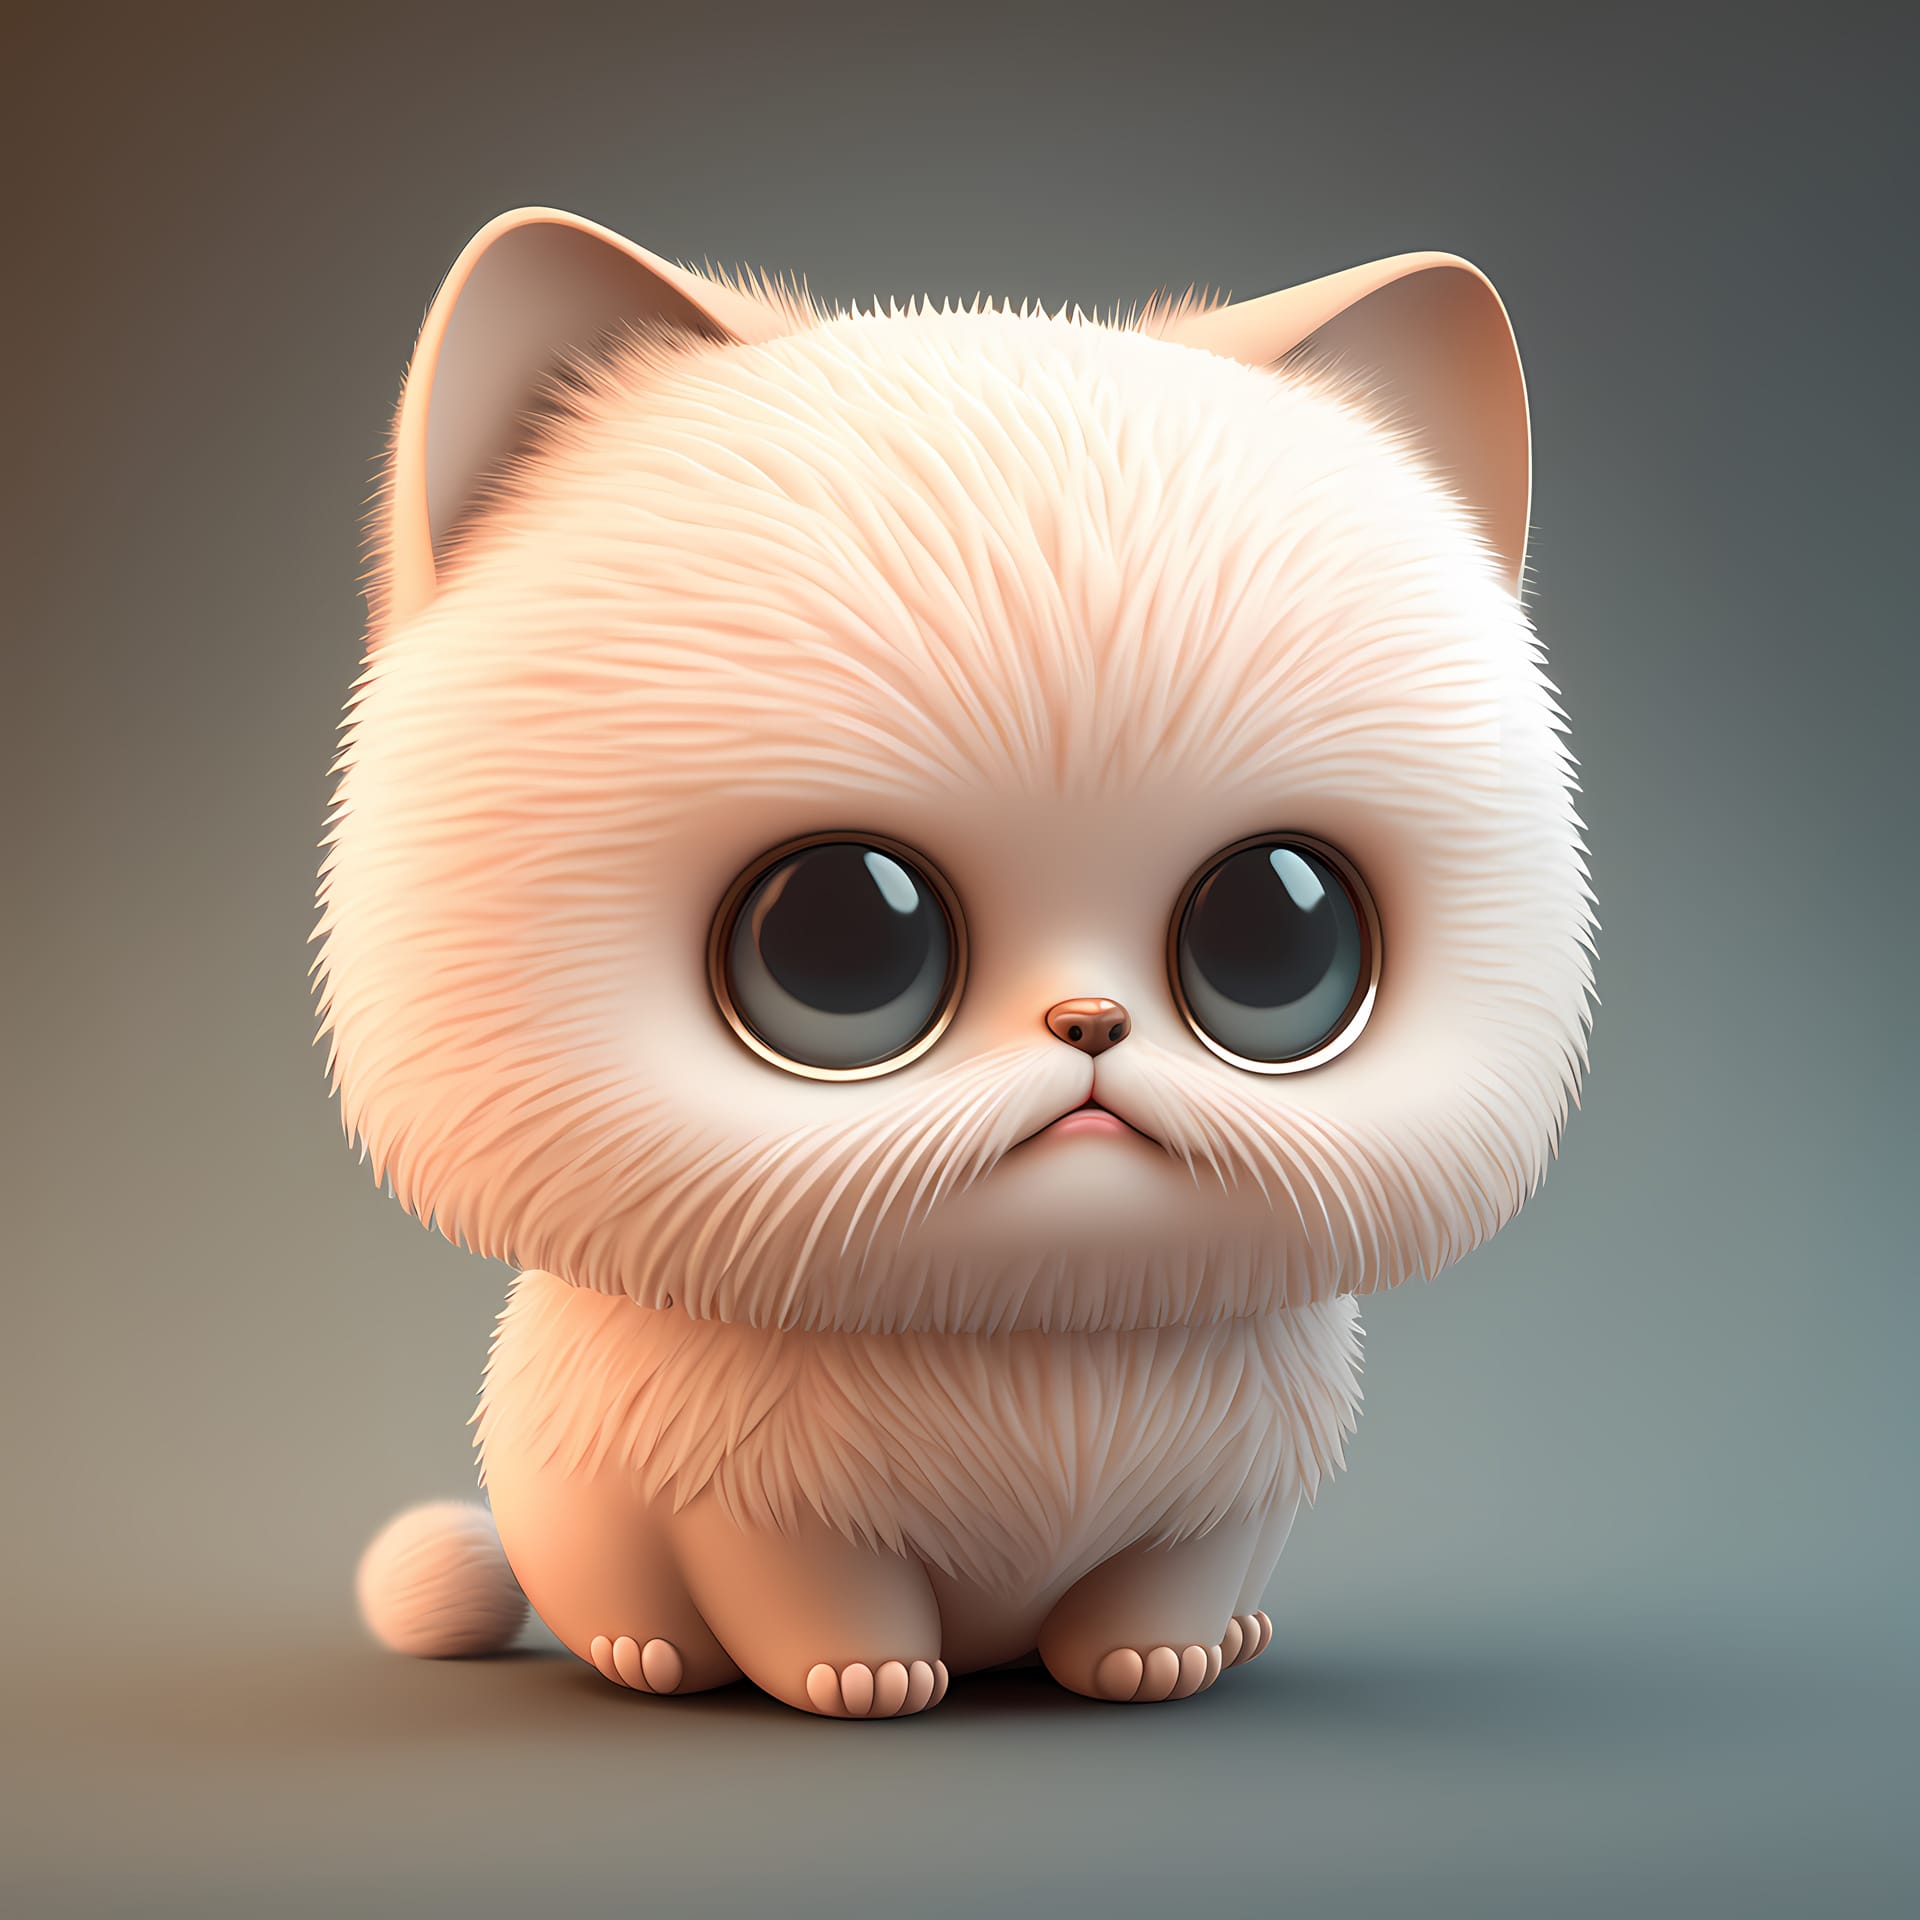 Adorable cute chubby cat 3d render expressive image